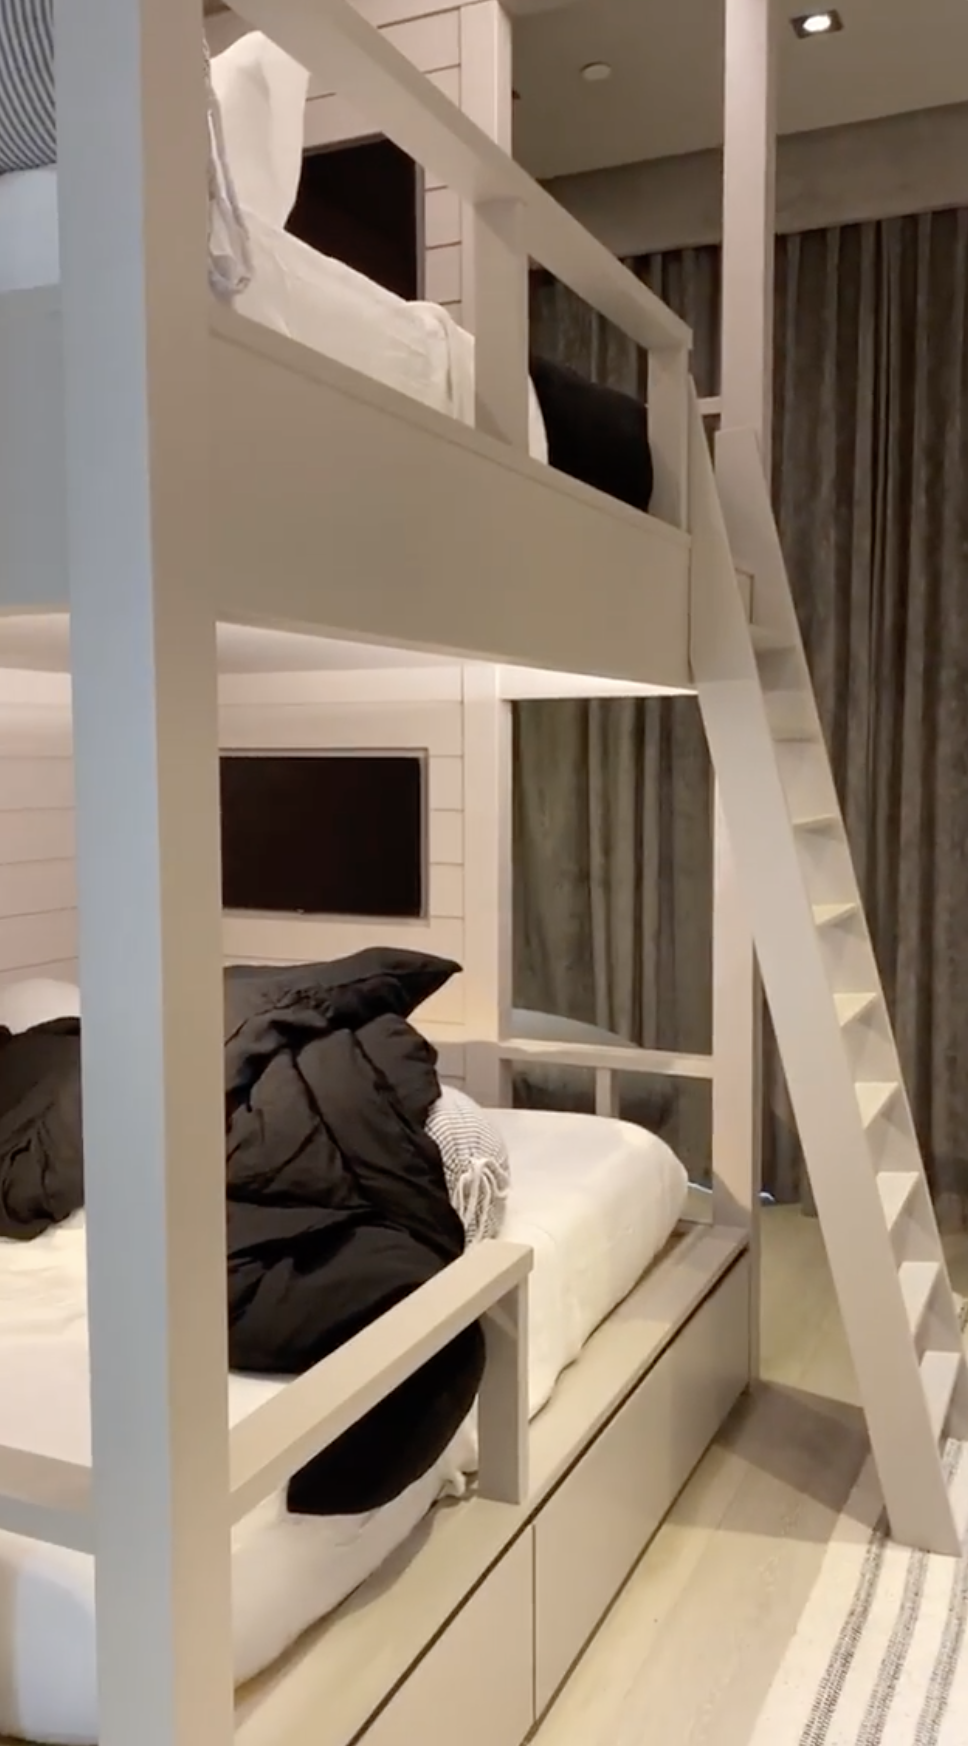 Kylie Jenner S Extremely Bougie Bunk Room, Bunk Beds With Built In Tvs